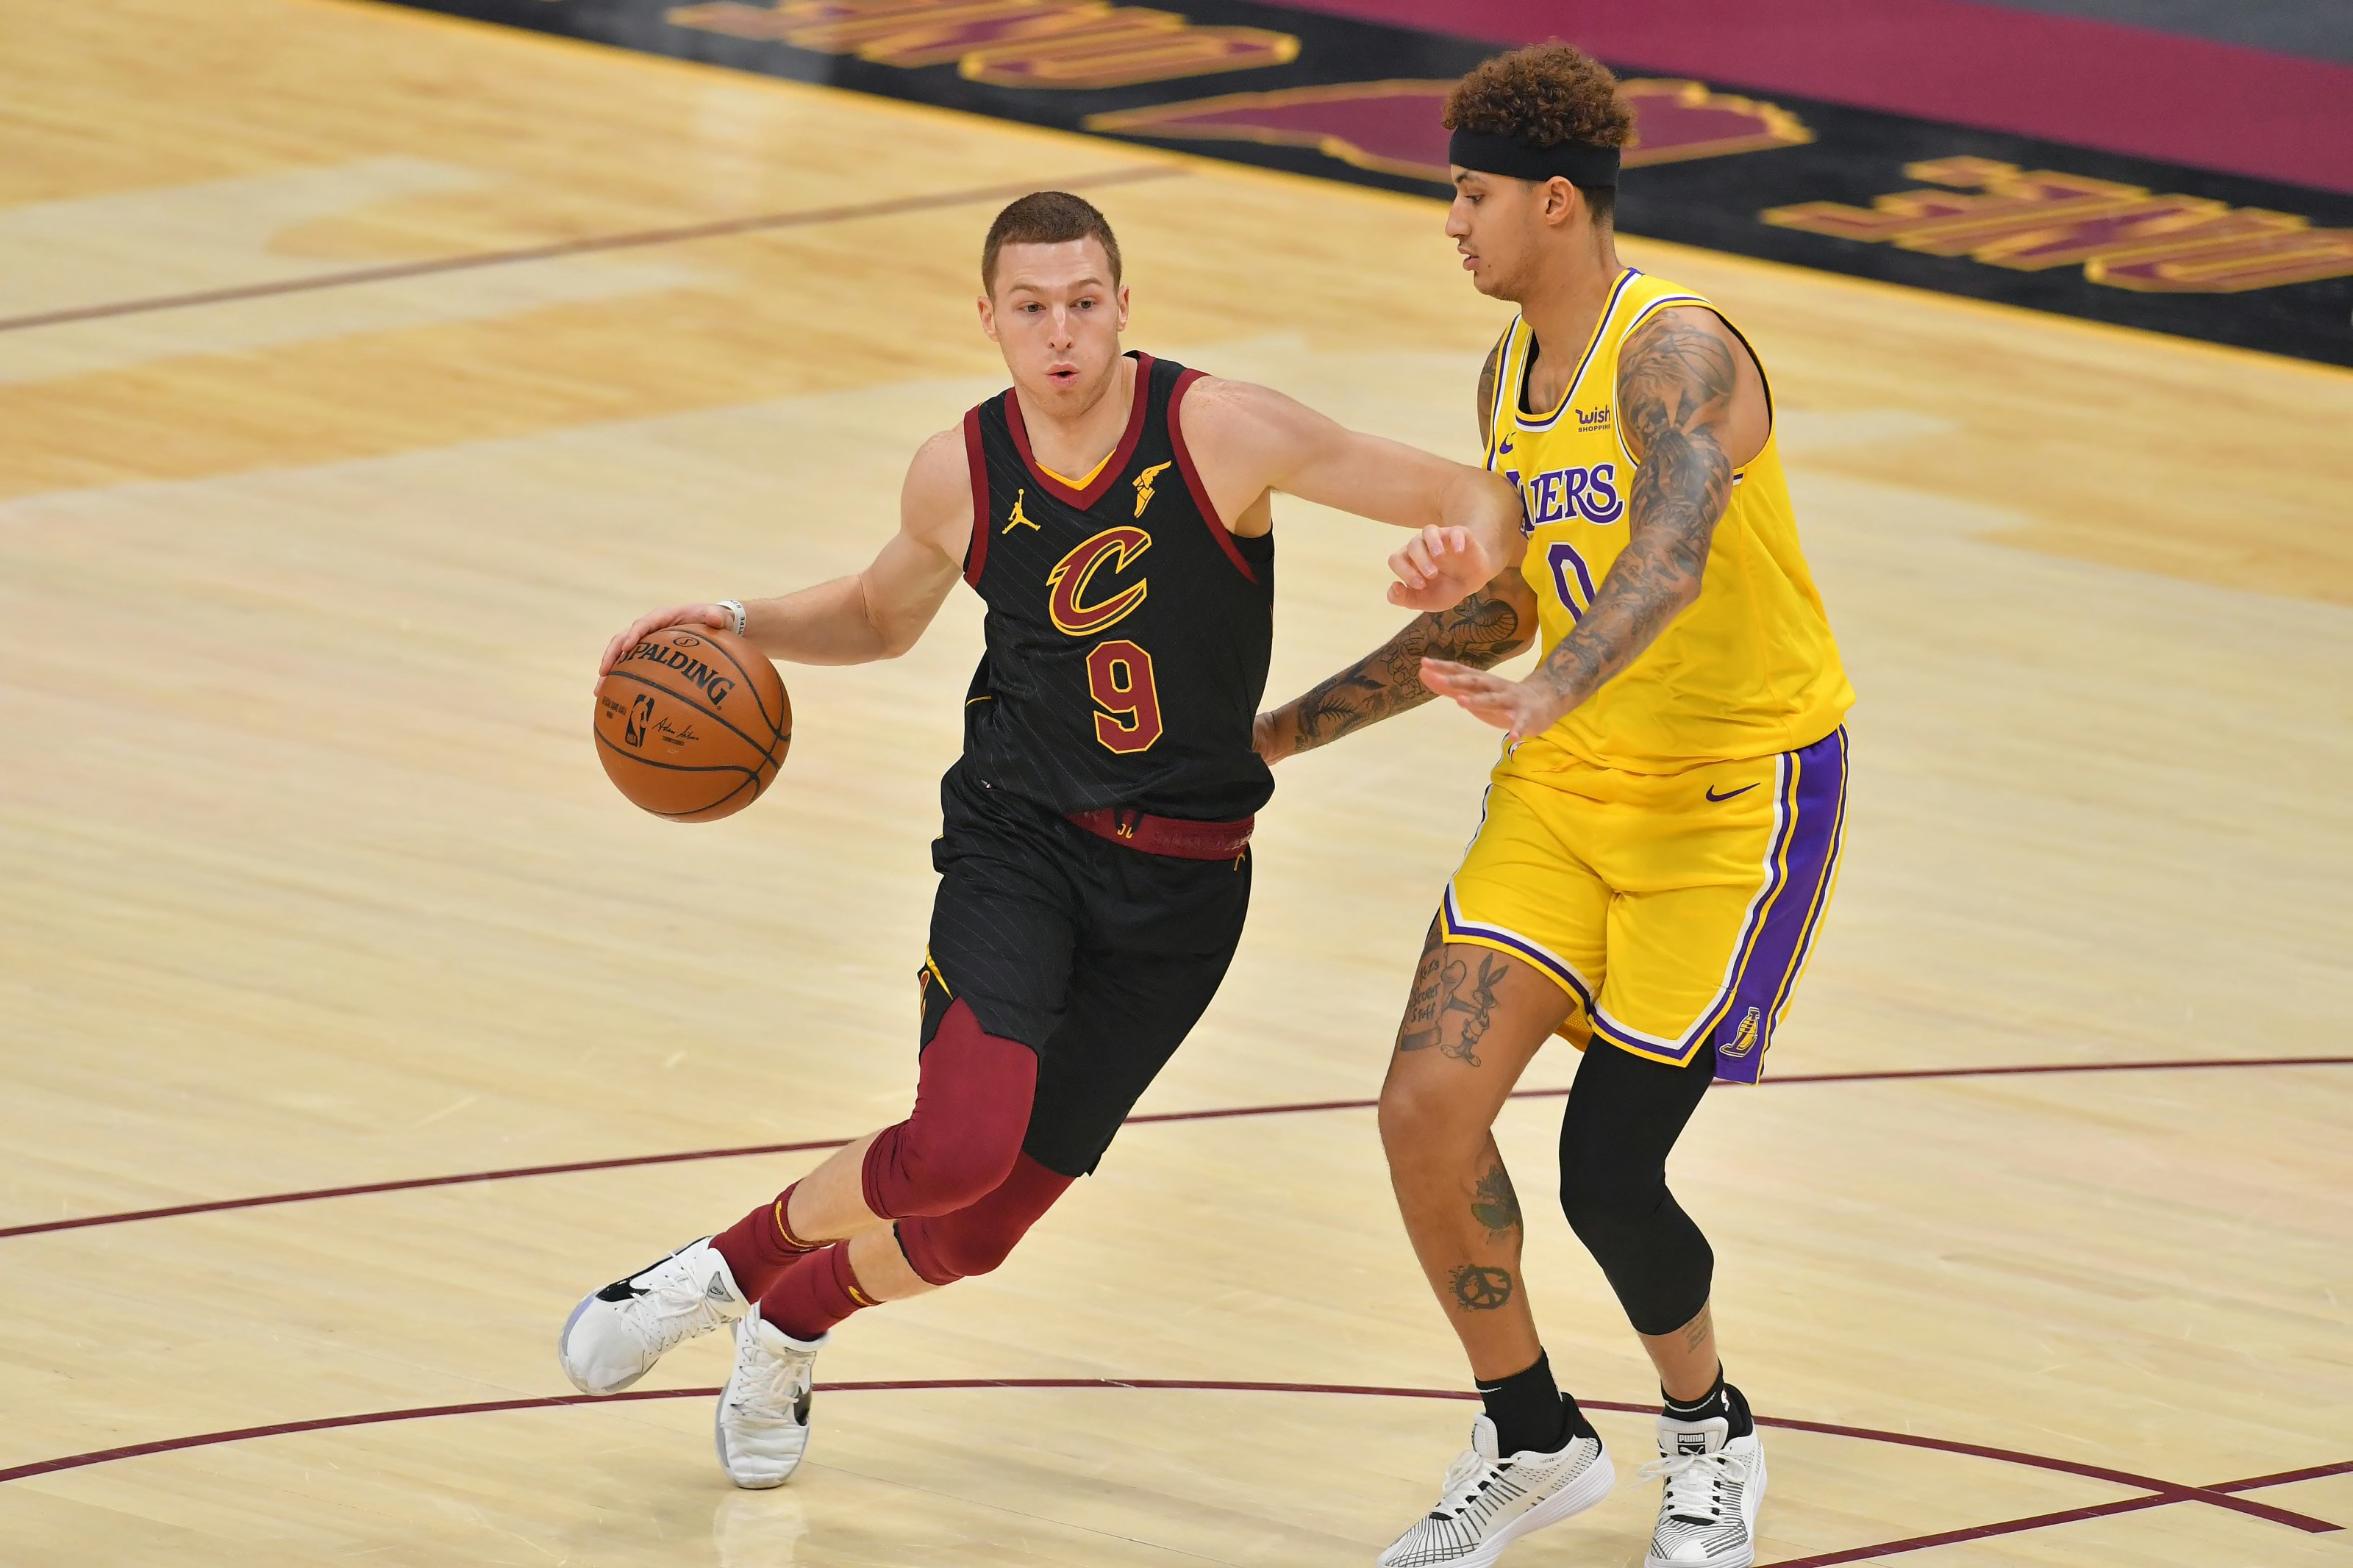 NBA Draft 2019: Dylan Windler is selected by Cavs